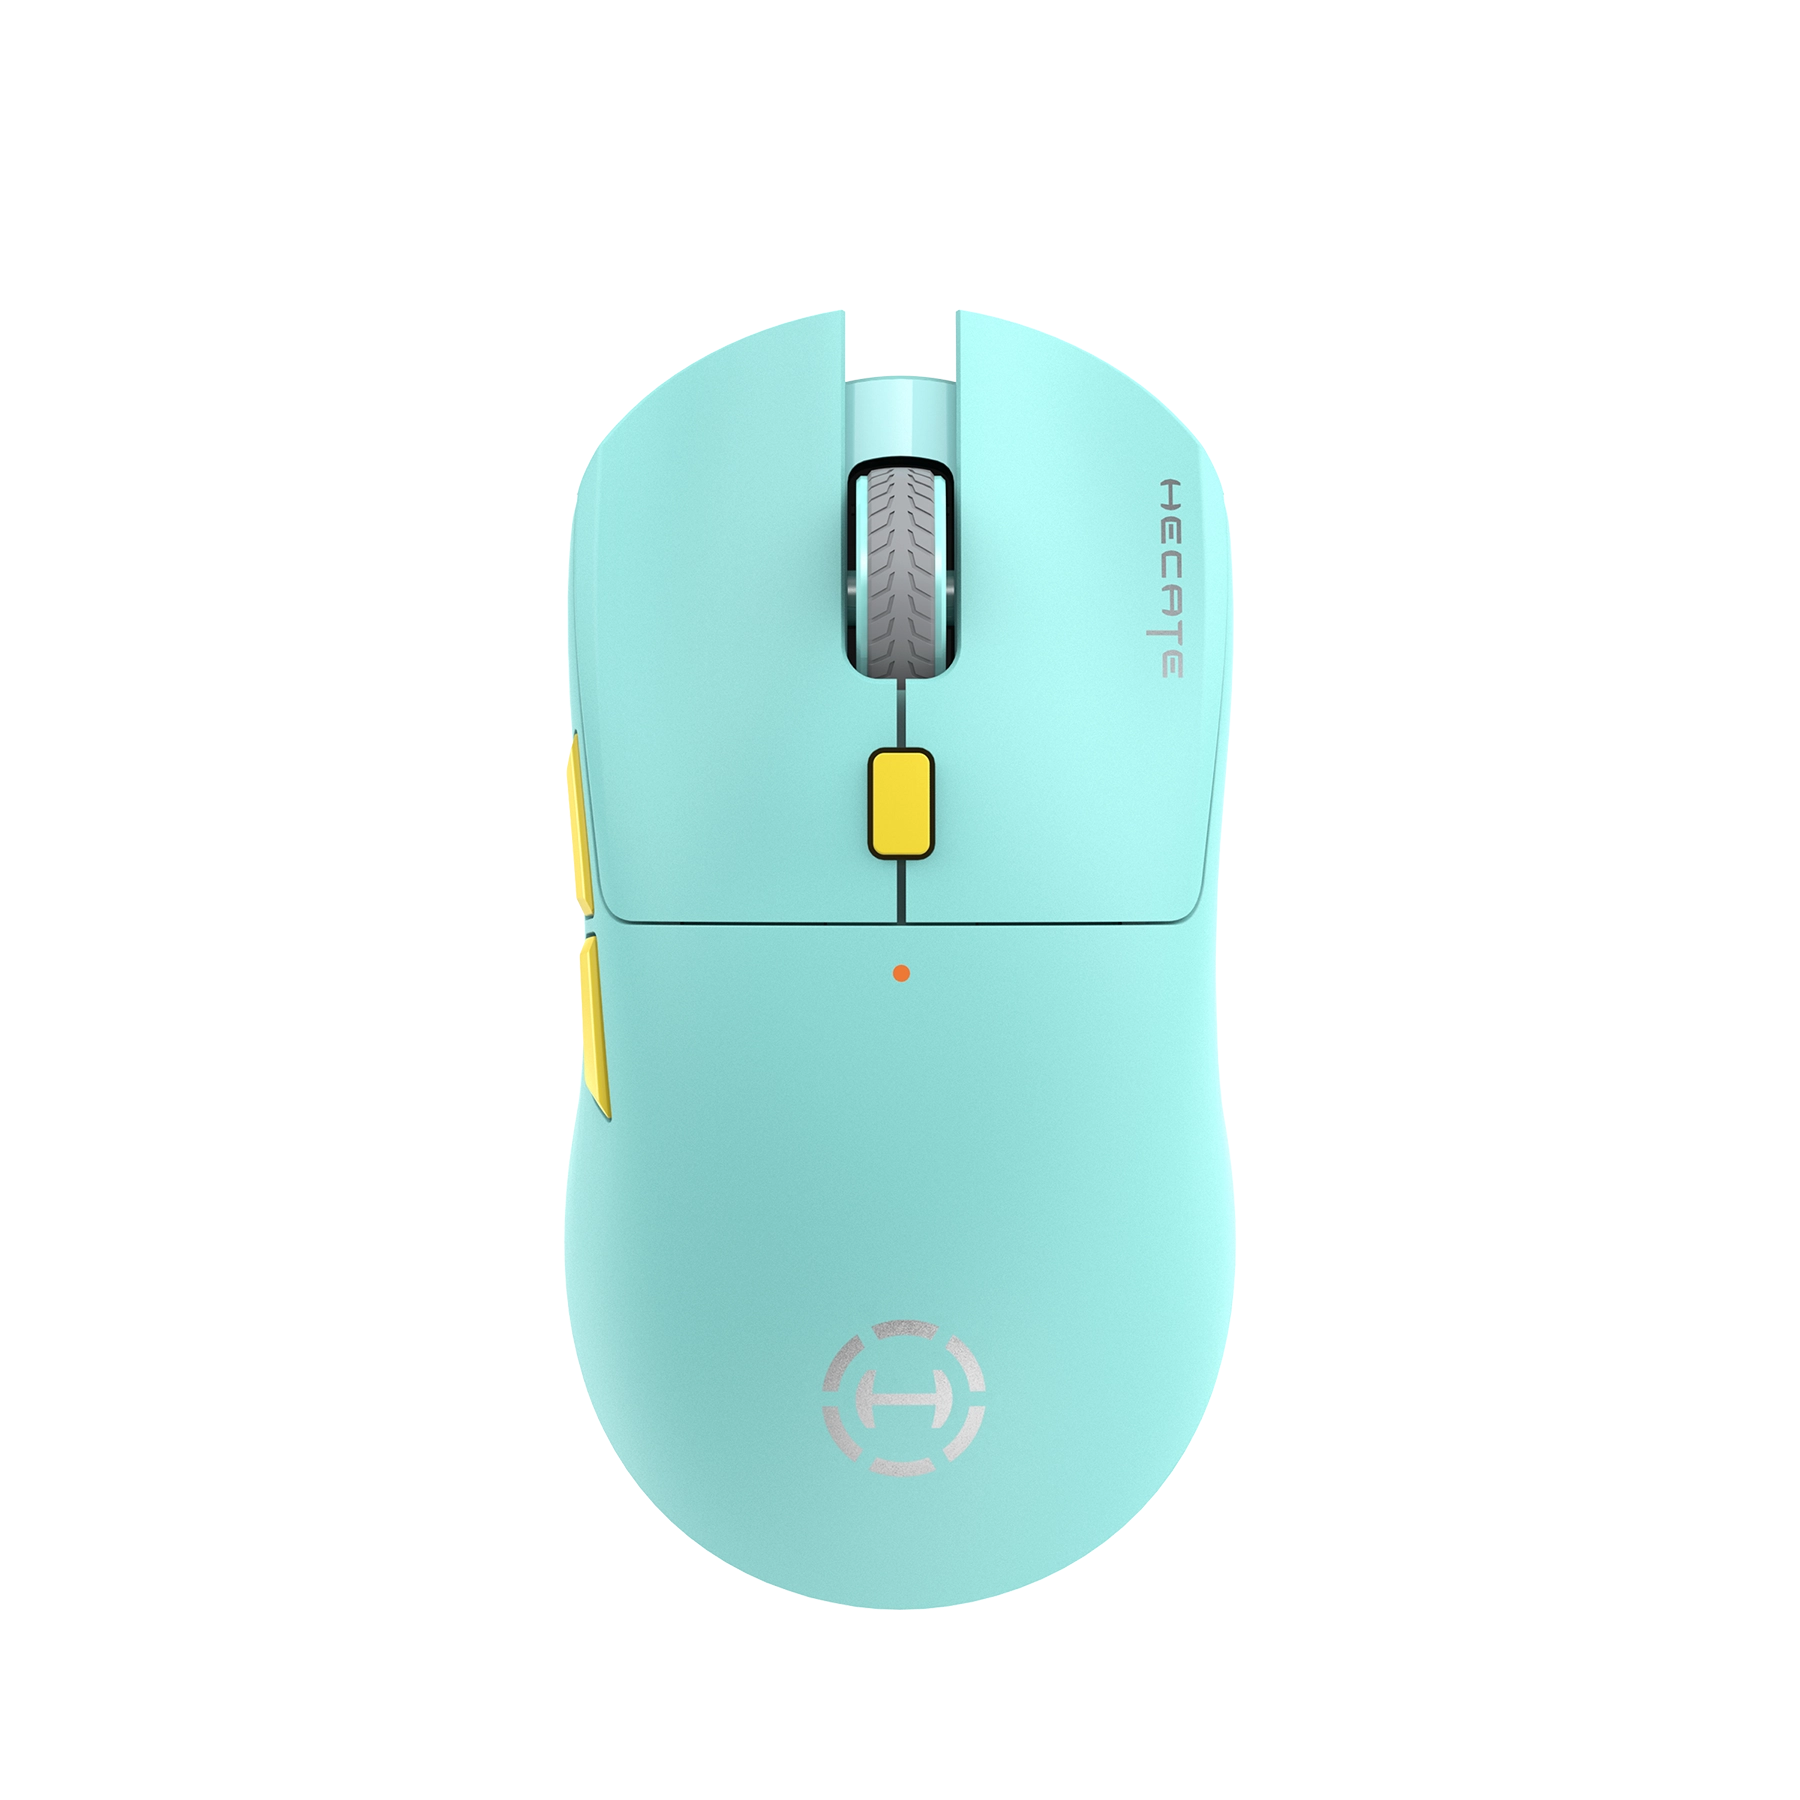 How the gaming wireless mouse evolved?